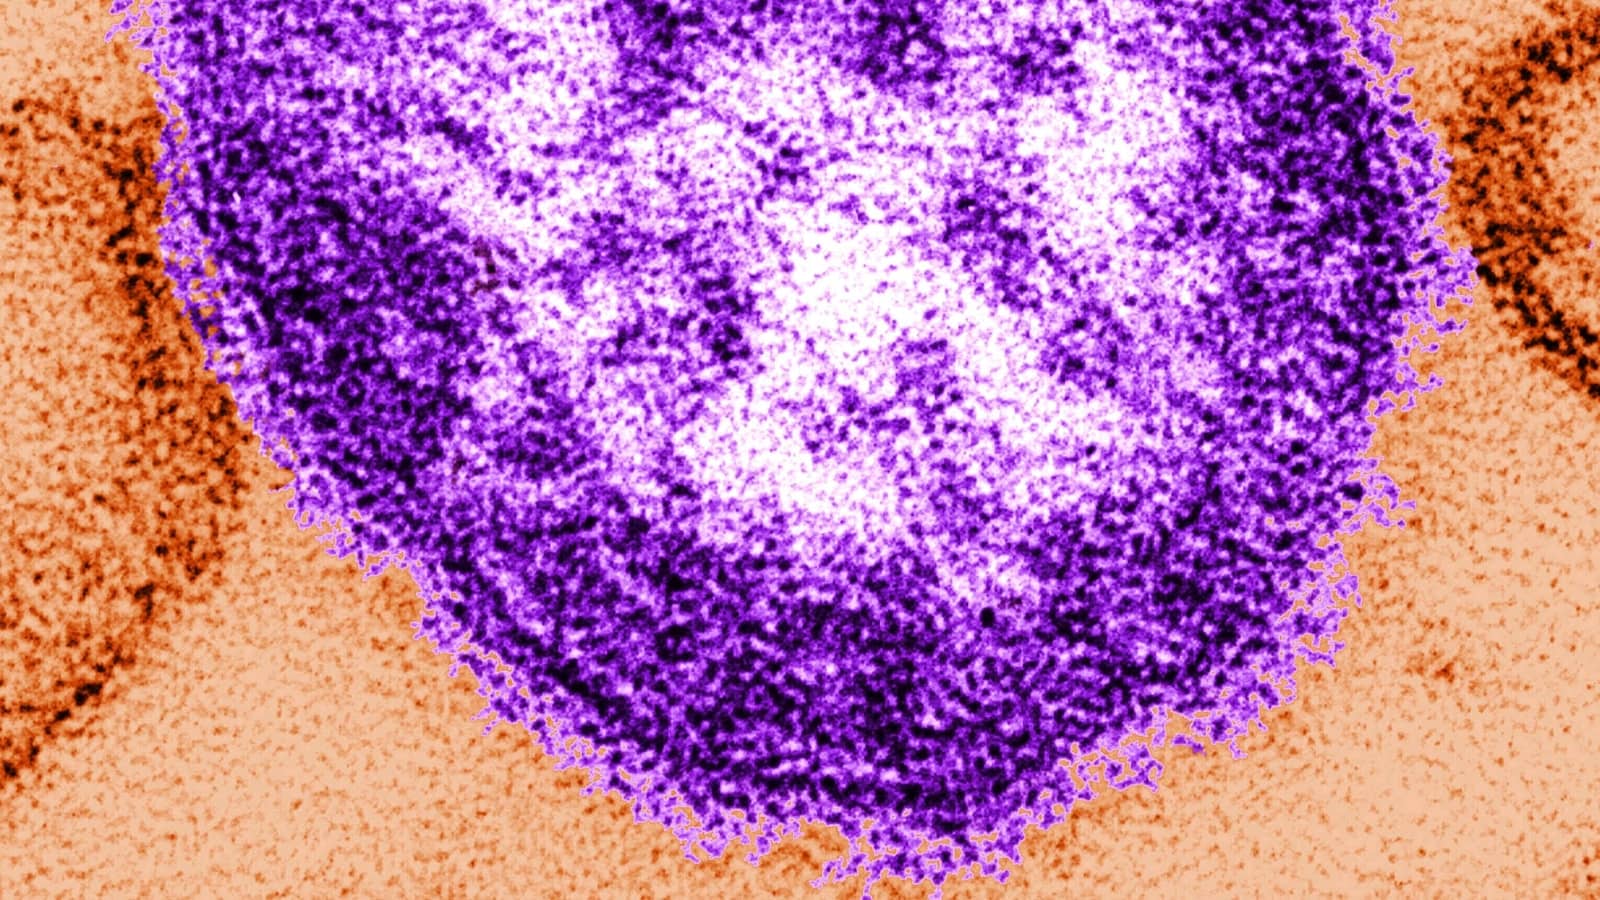 West Virginia confirms first measles case since 2009